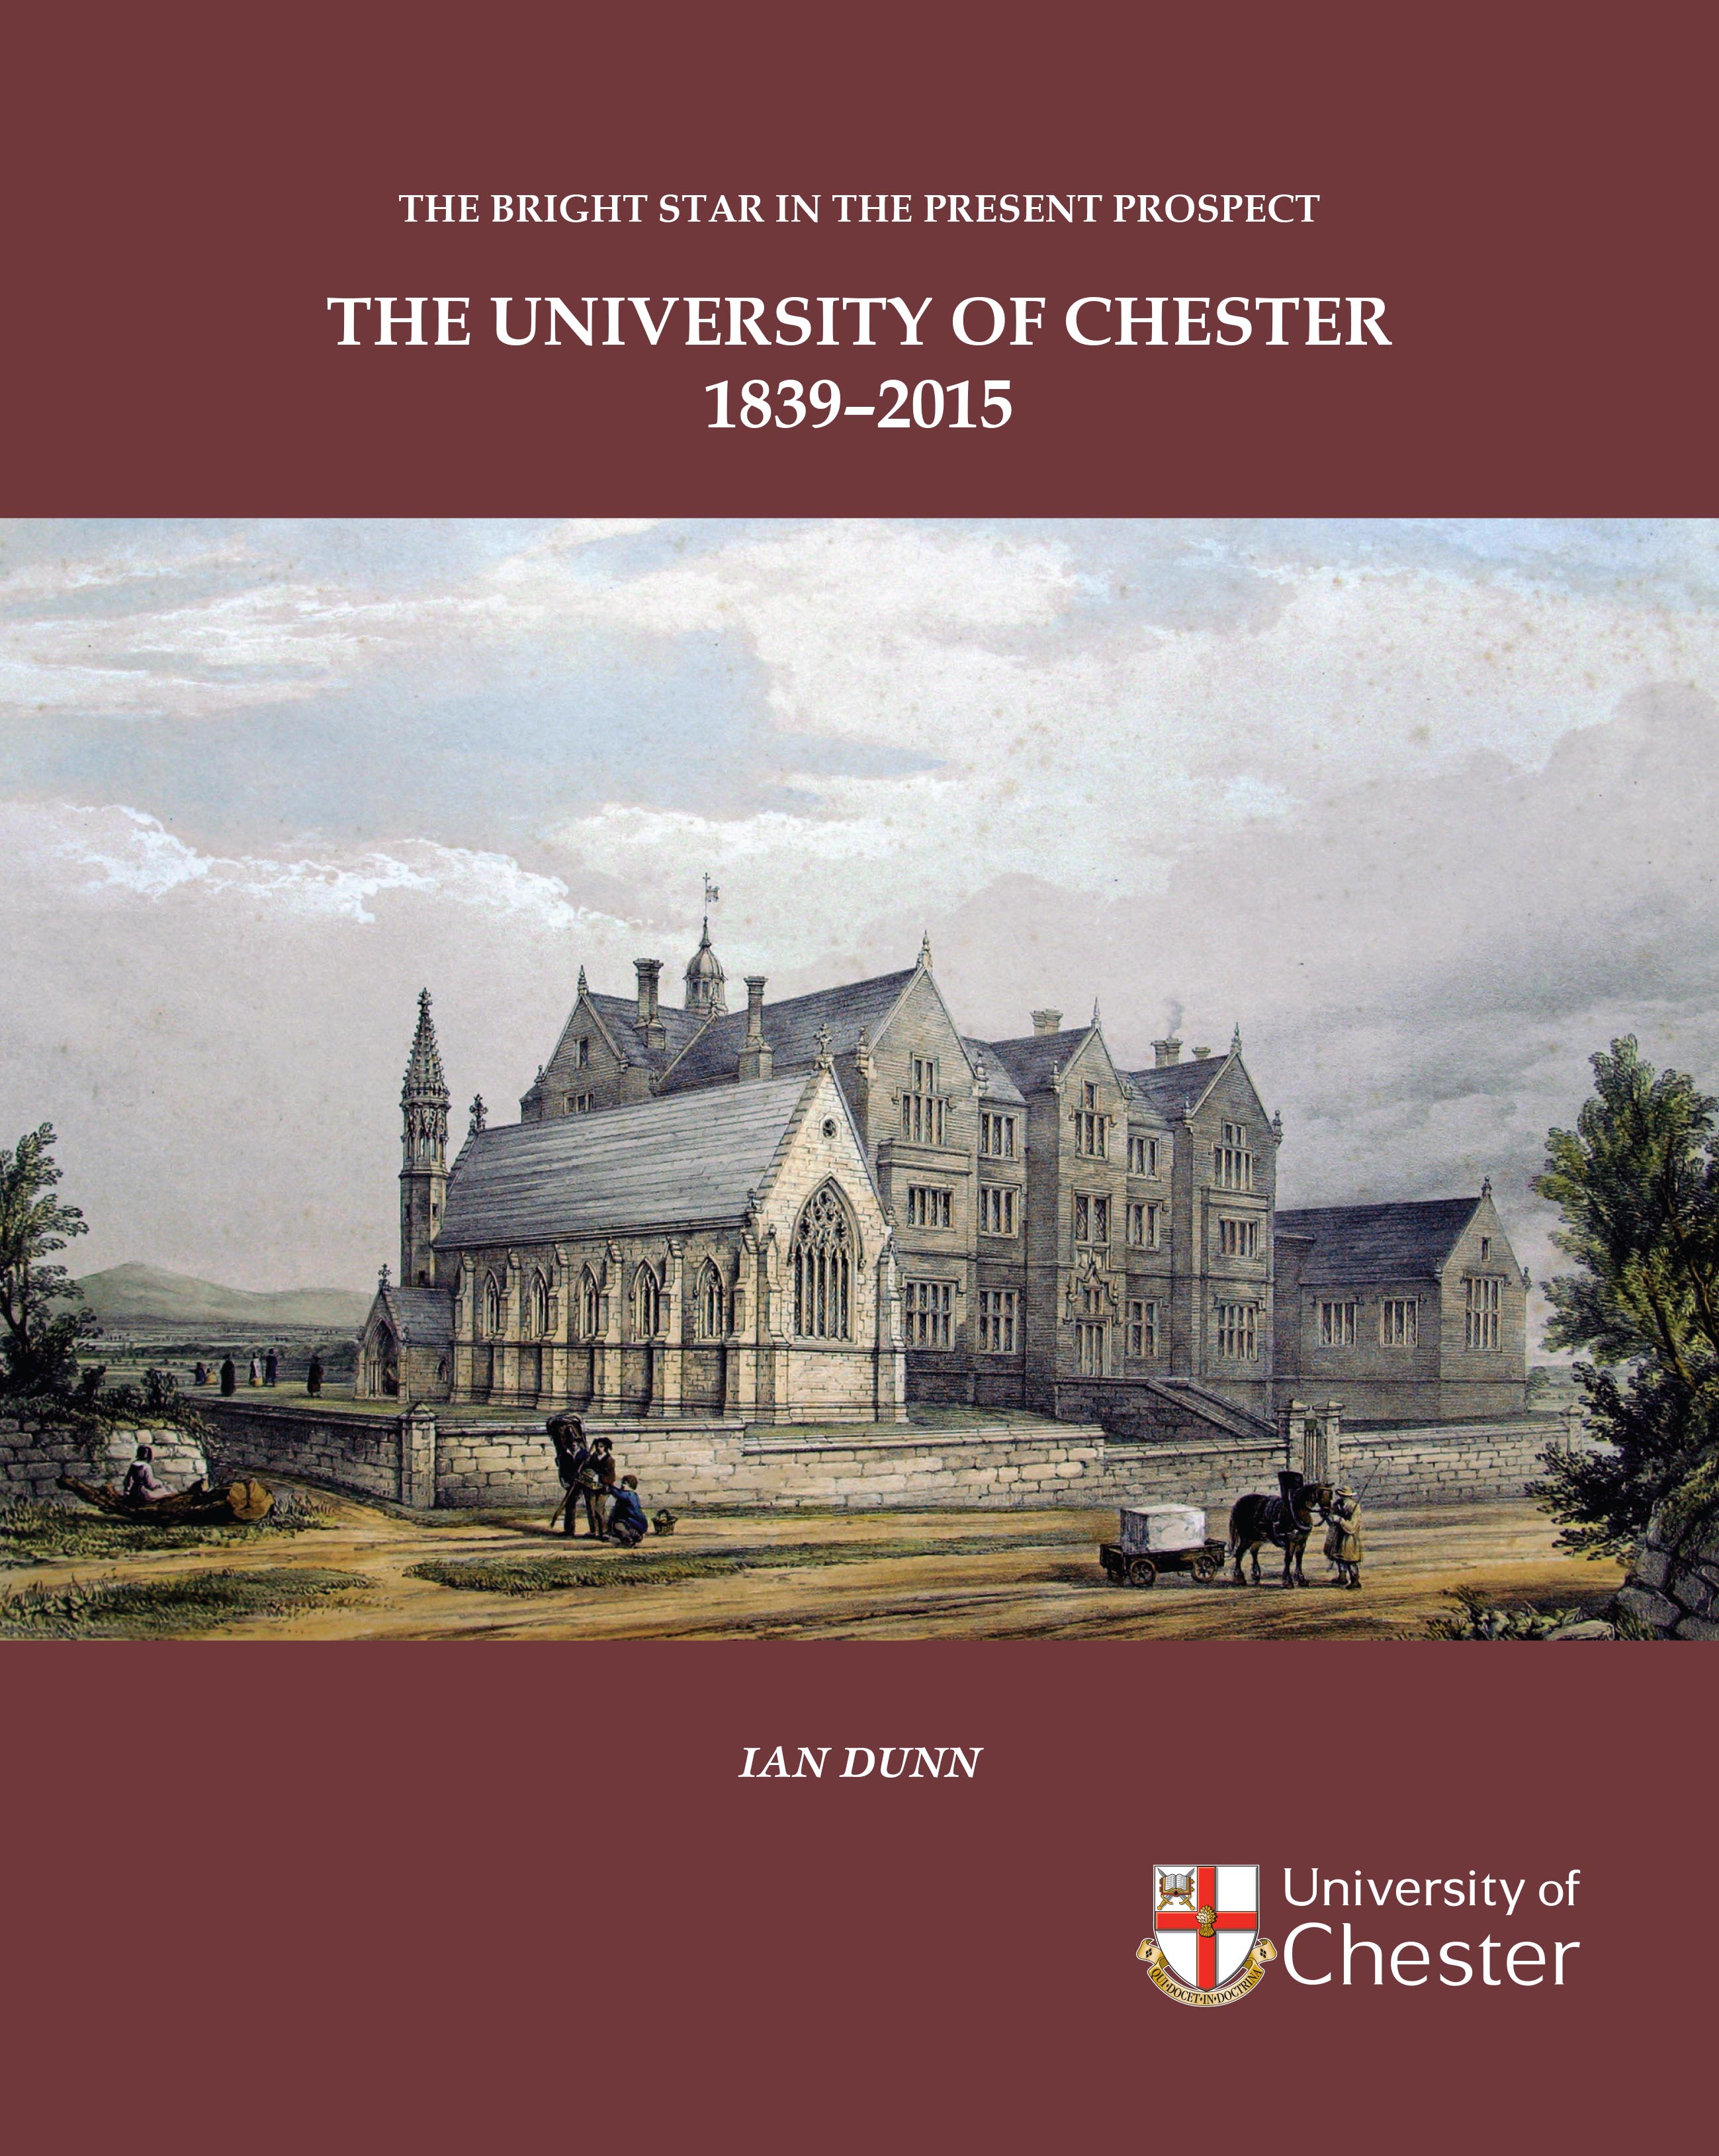 The Bright Star in the Present Prospect: The University of Chester 1839-2015